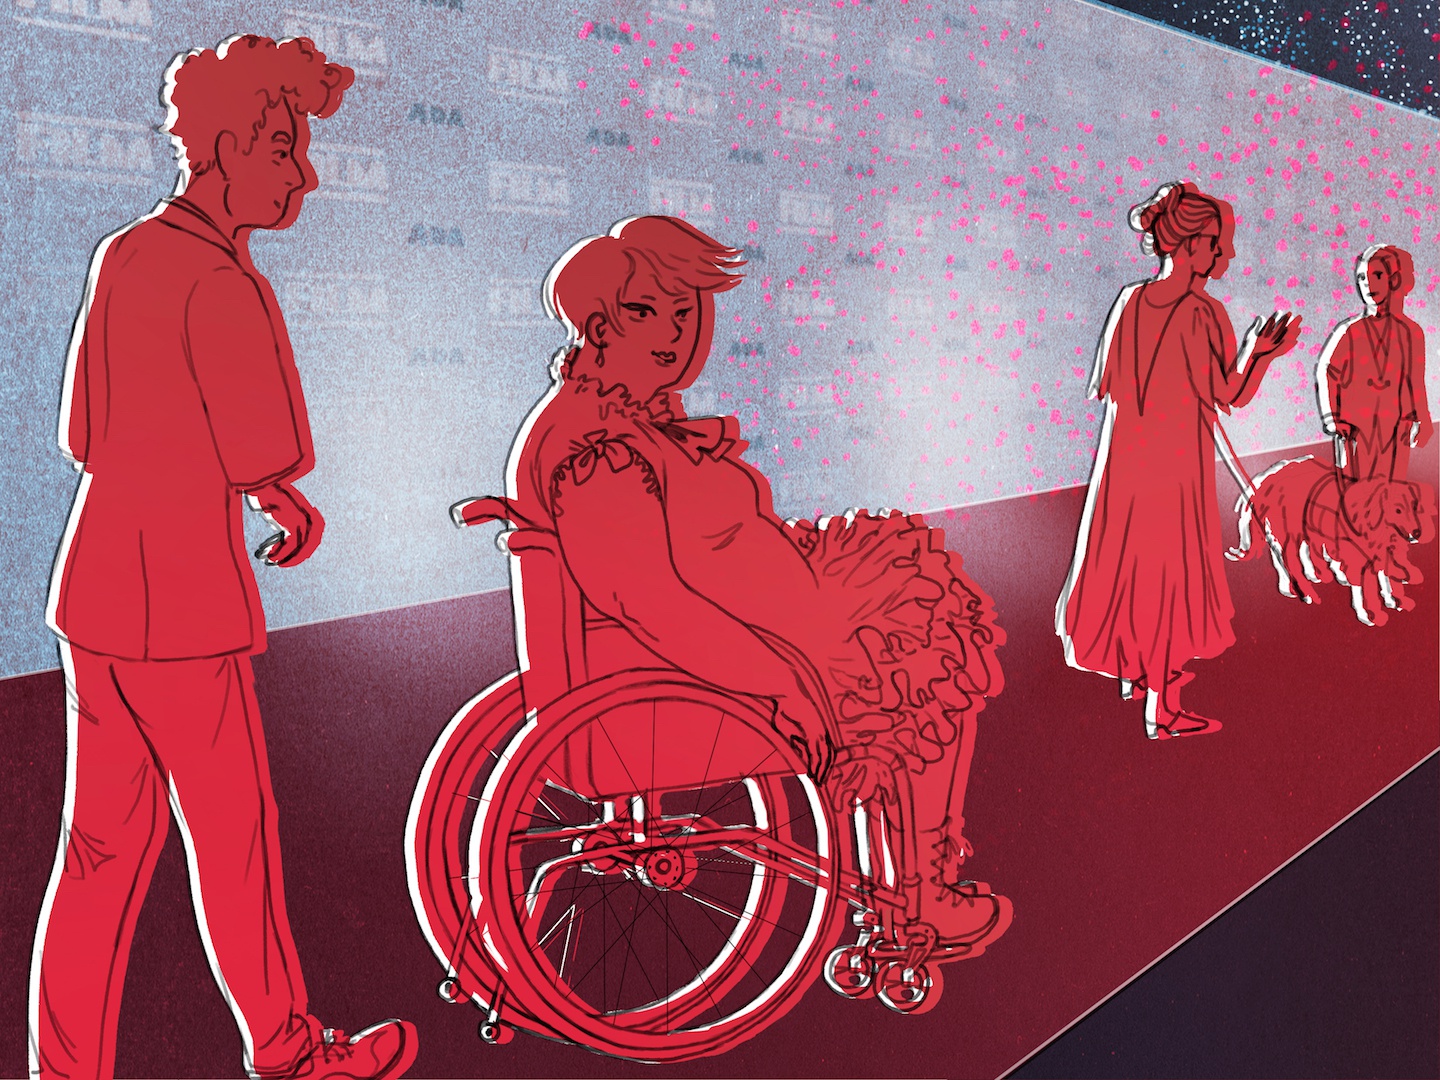 30 Years After the Americans with Disabilities Act, Actors Still Demand Change